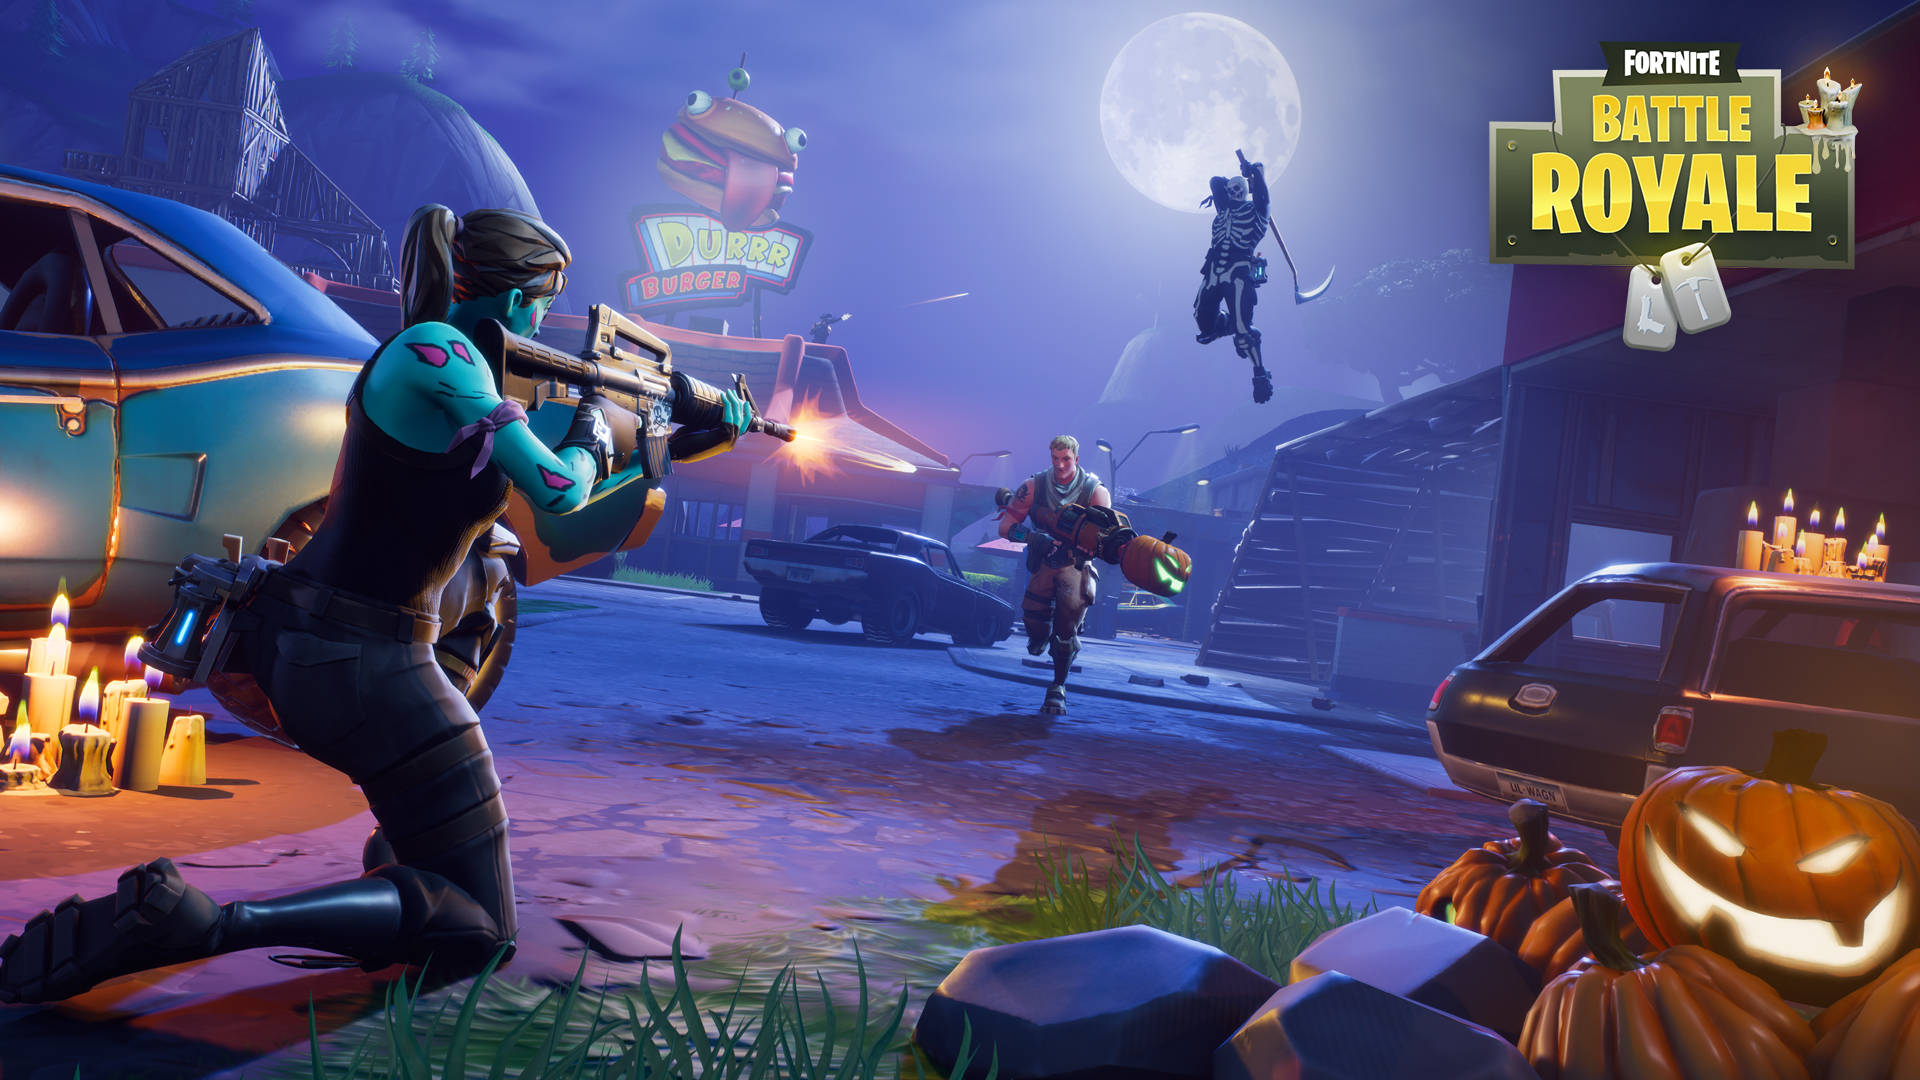 "a Hilarious Moment In Fortnite Battle Royale" Wallpaper